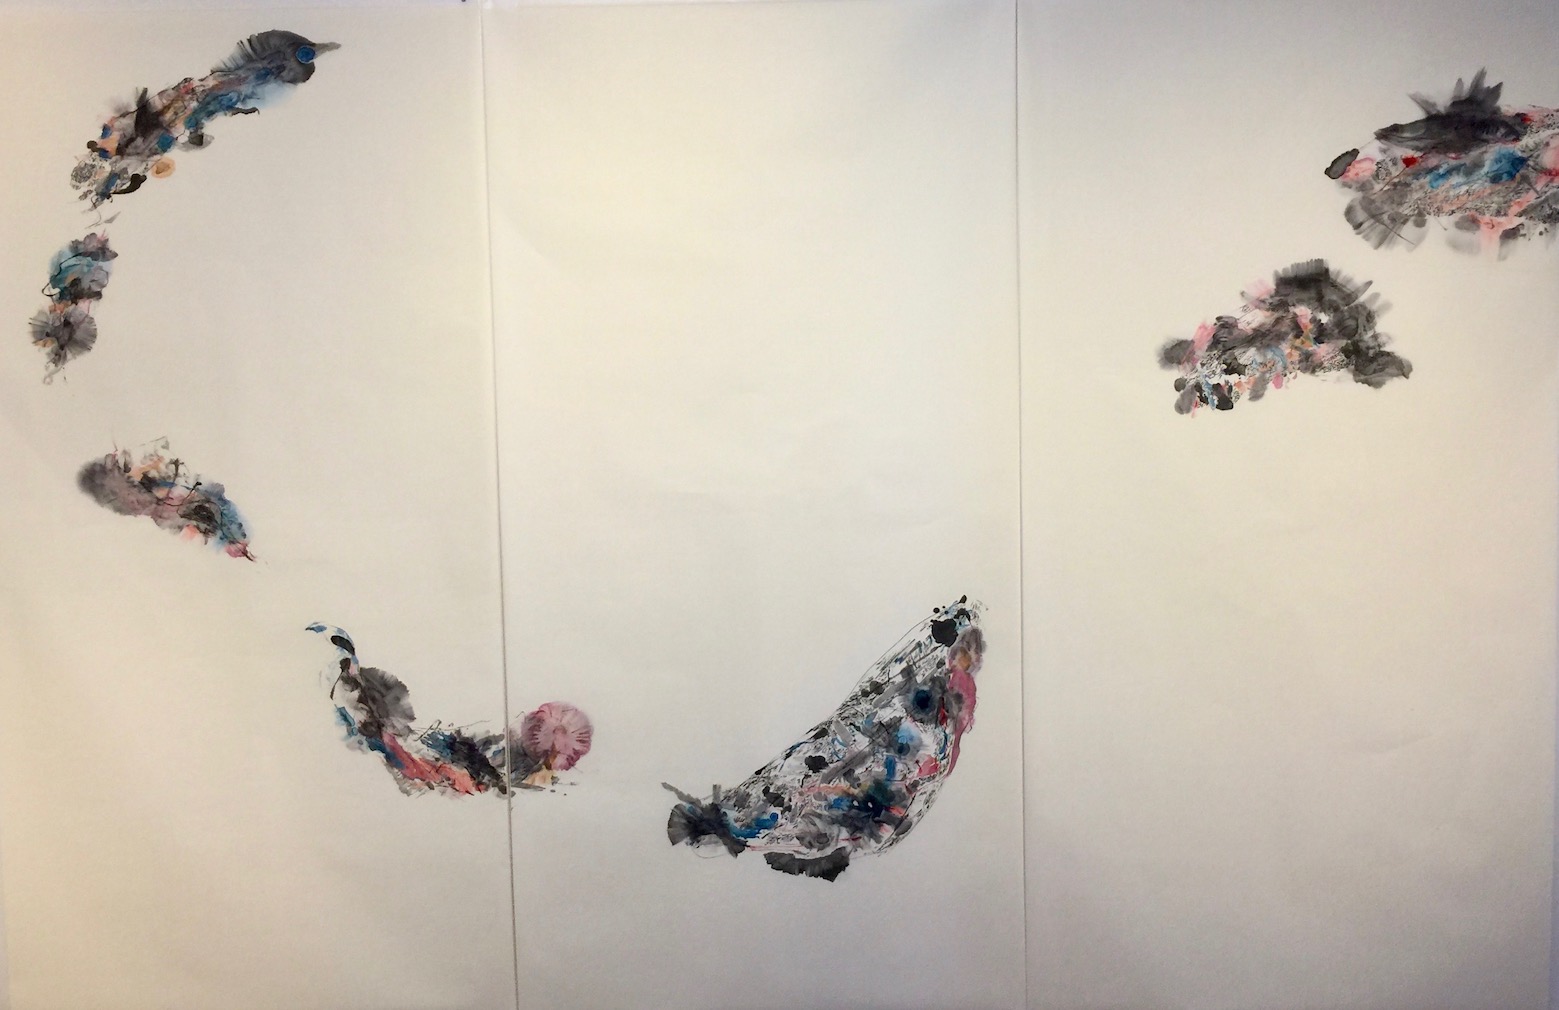 Opening up lines in space 3 空間に線を開く 3 138 cms x 70 cms x 3 Sumi ink, acrylic, water colour, 墨水彩絵具、アクリル2021